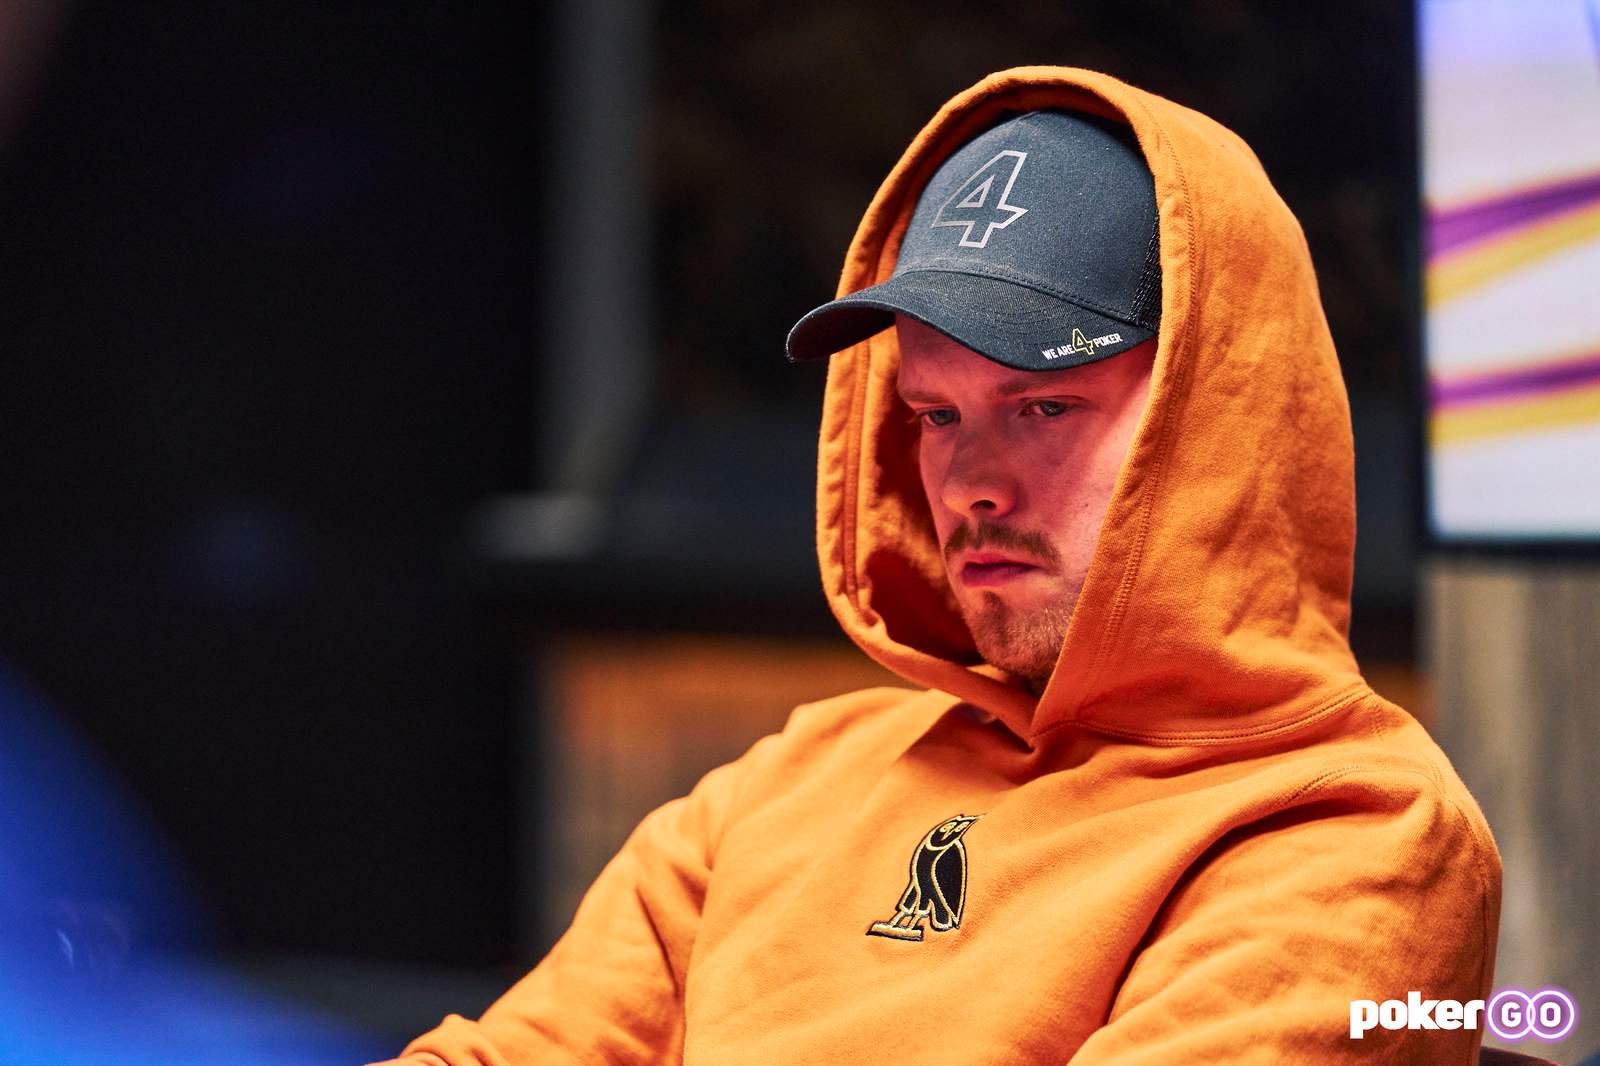 Joni Jouhkimainen Leads the Final Seven in PGT PLO Series Event #5: $10,000 Pot-Limit Omaha